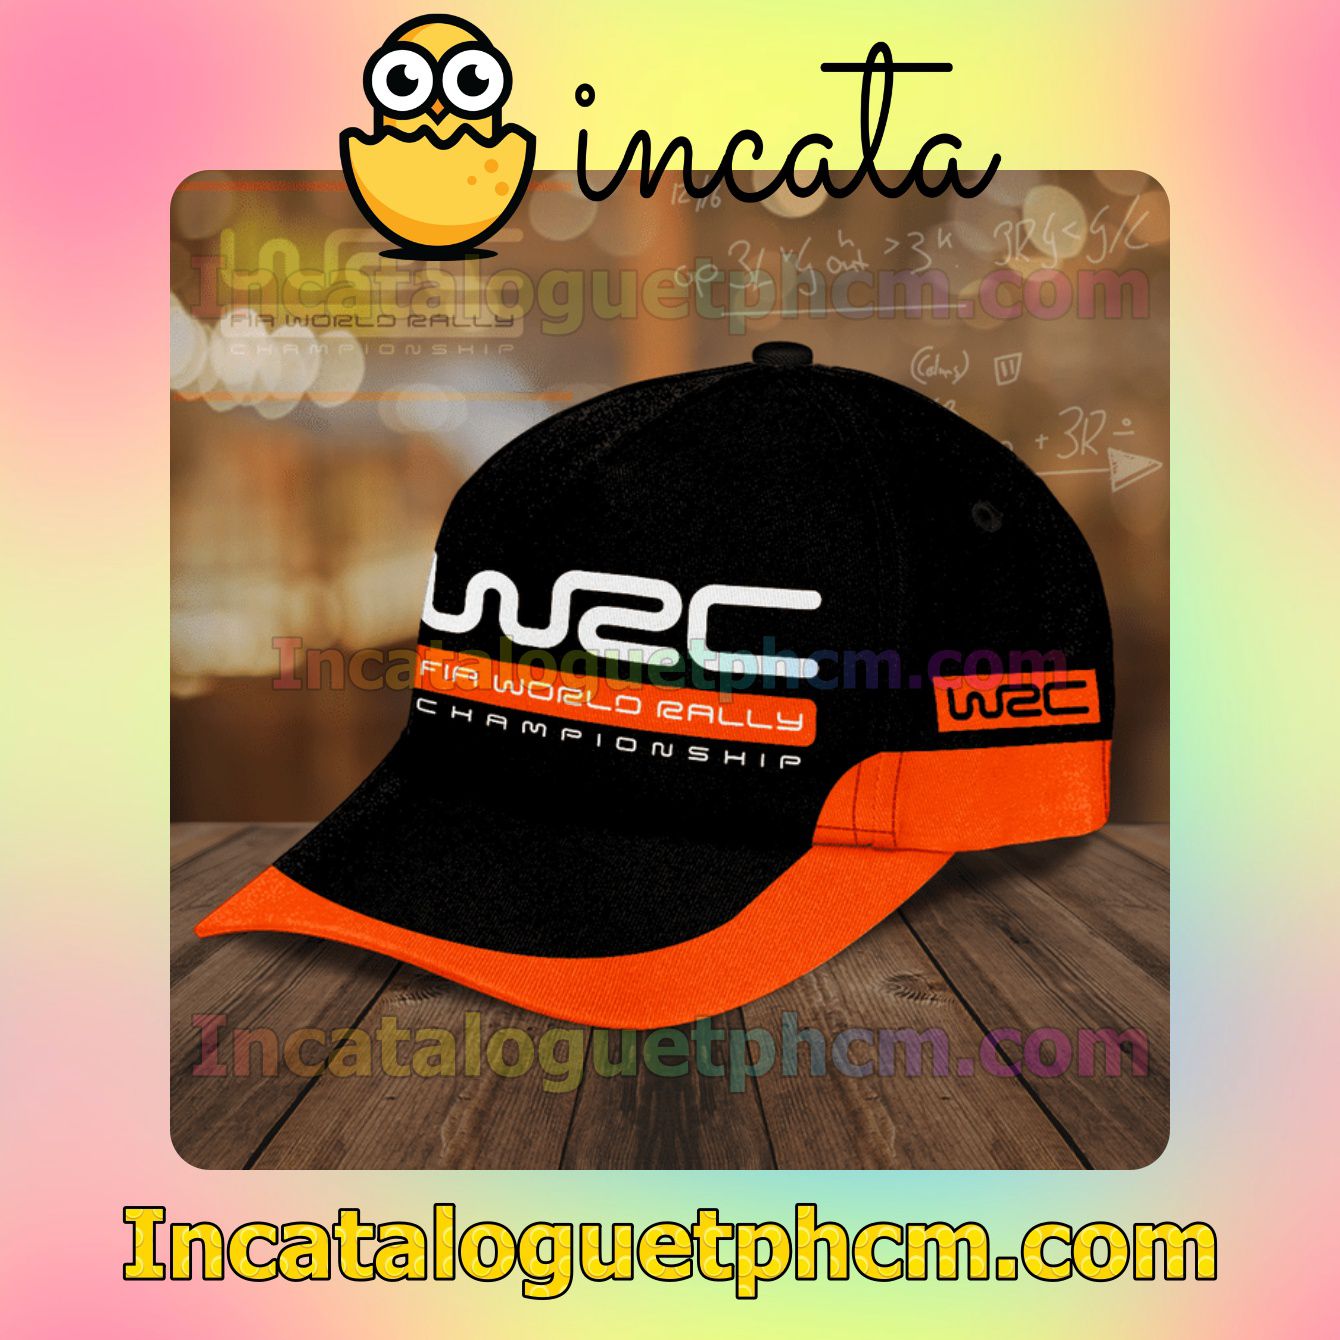 Adorable Wrc Fia World Rally Championship Orange And Black Classic Hat Caps Gift For Men